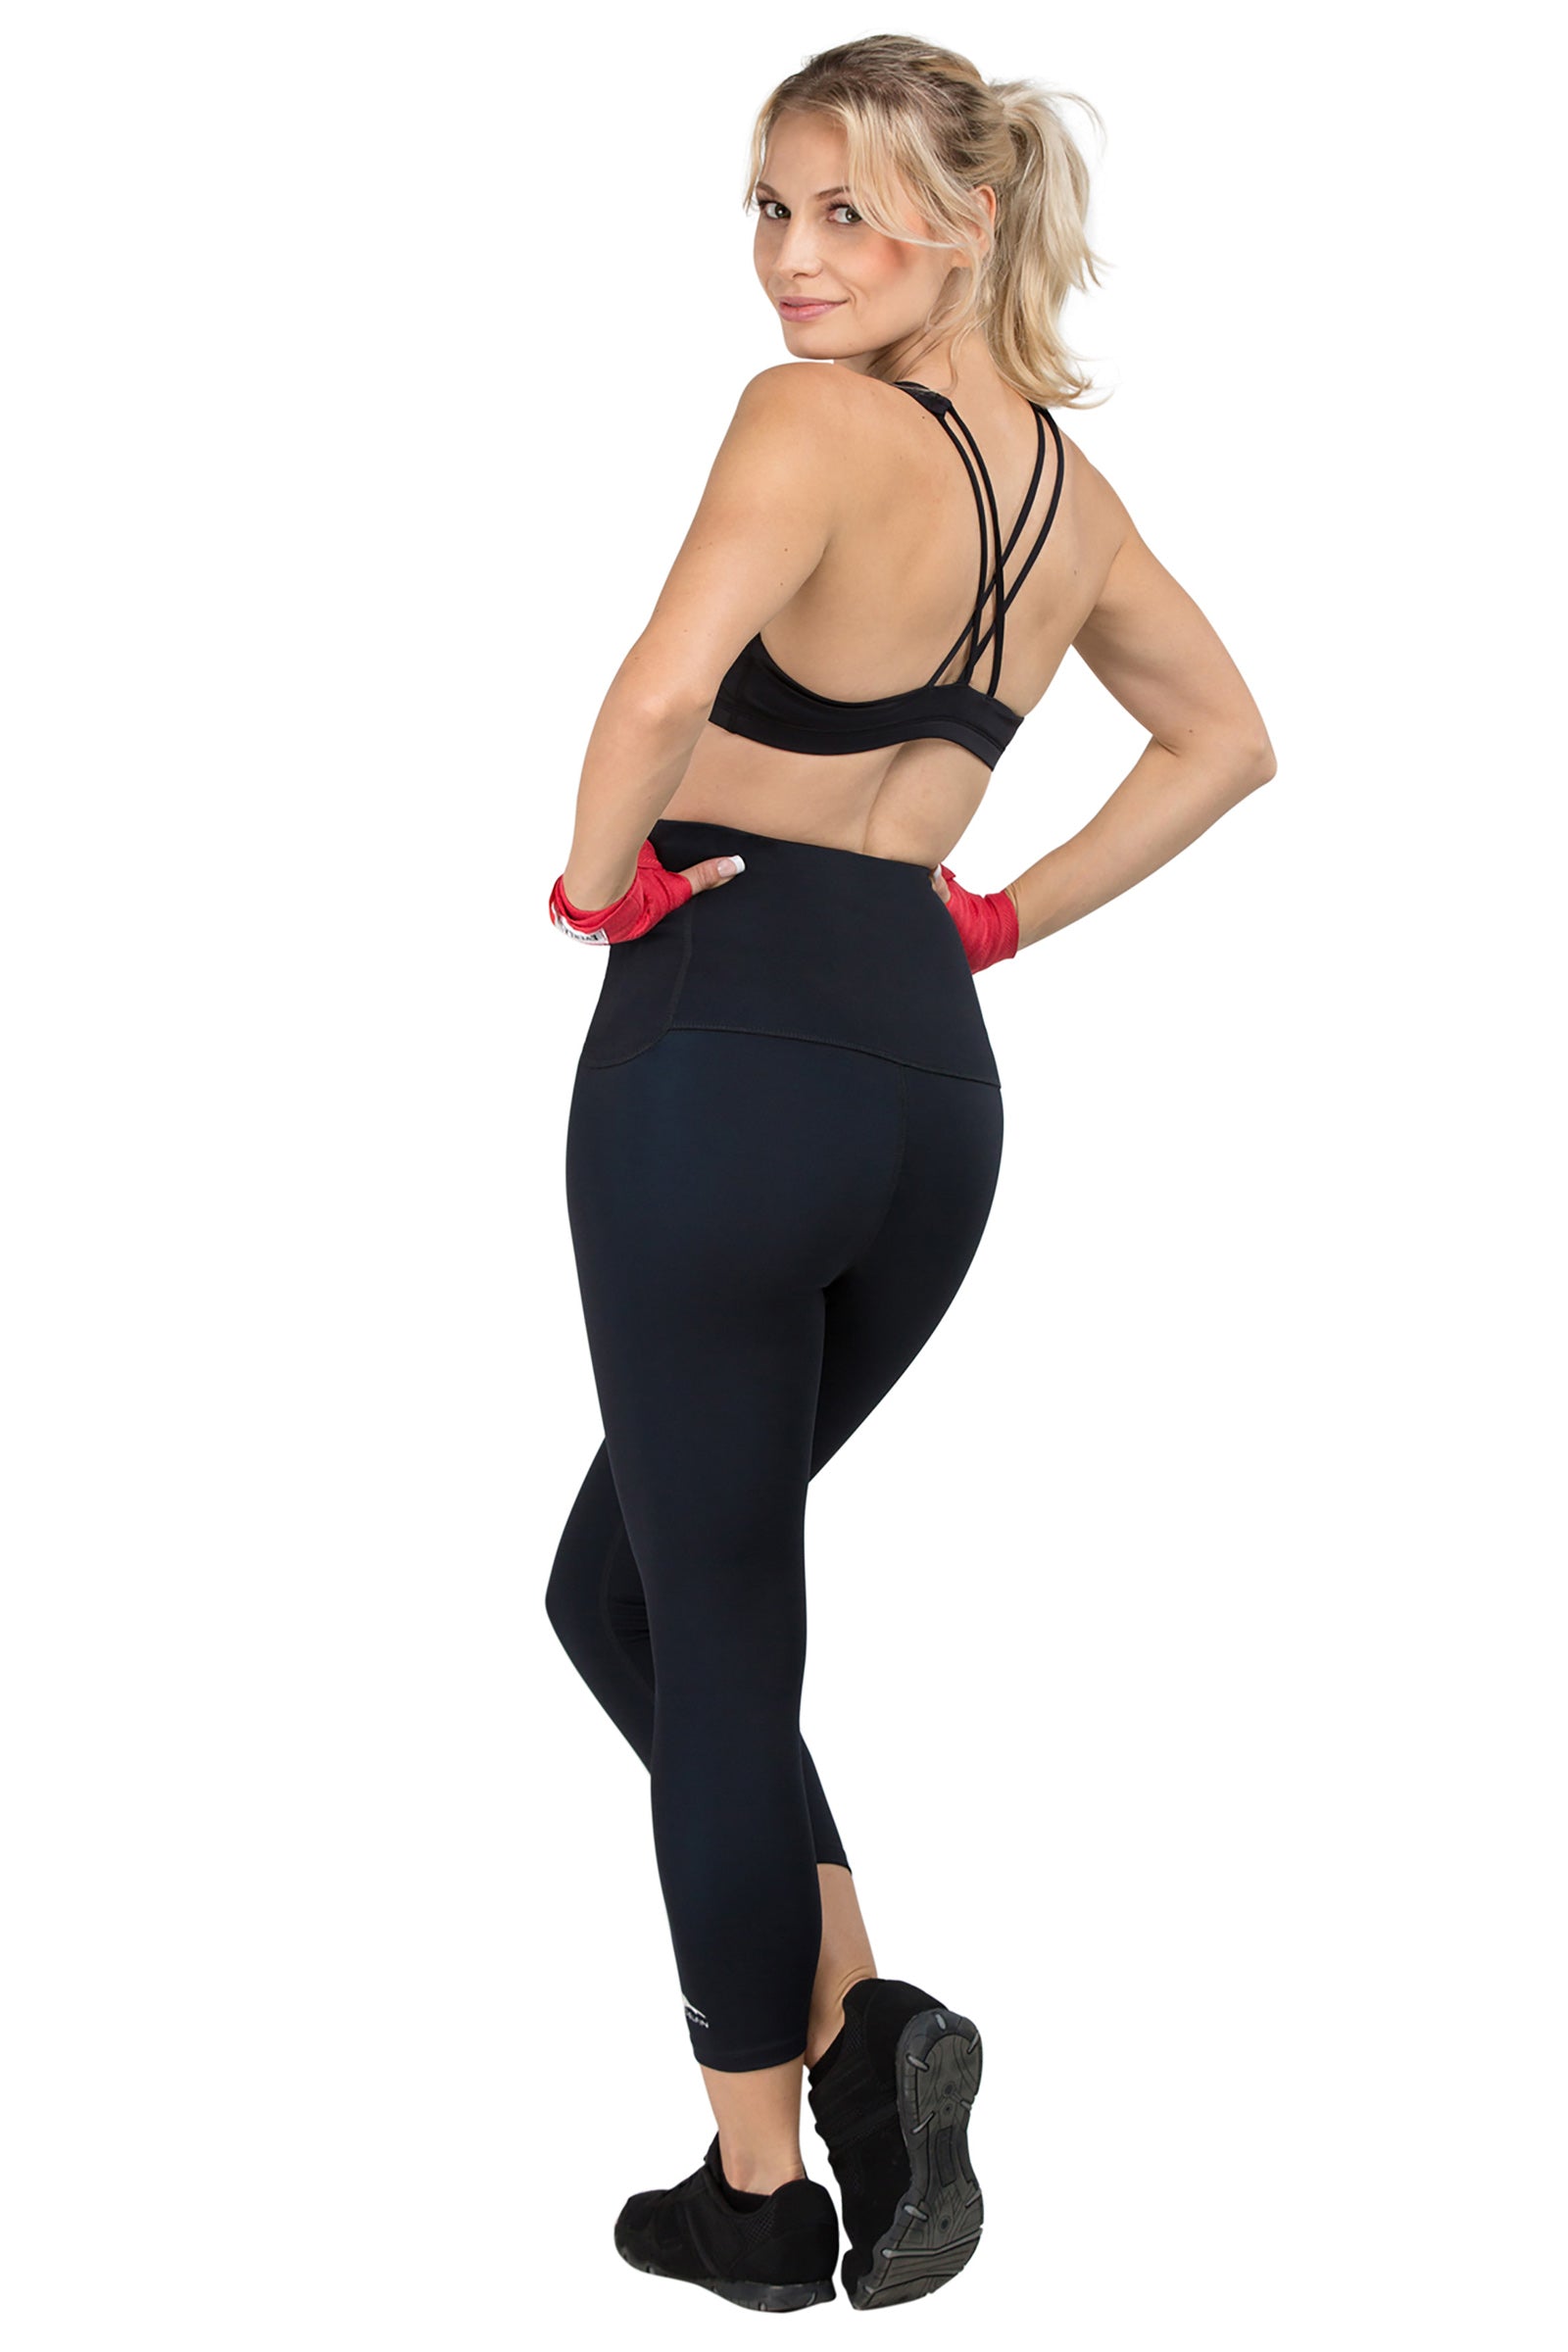 Mineral Infused High Waist Exercise Capris - Black - Delfin Brands